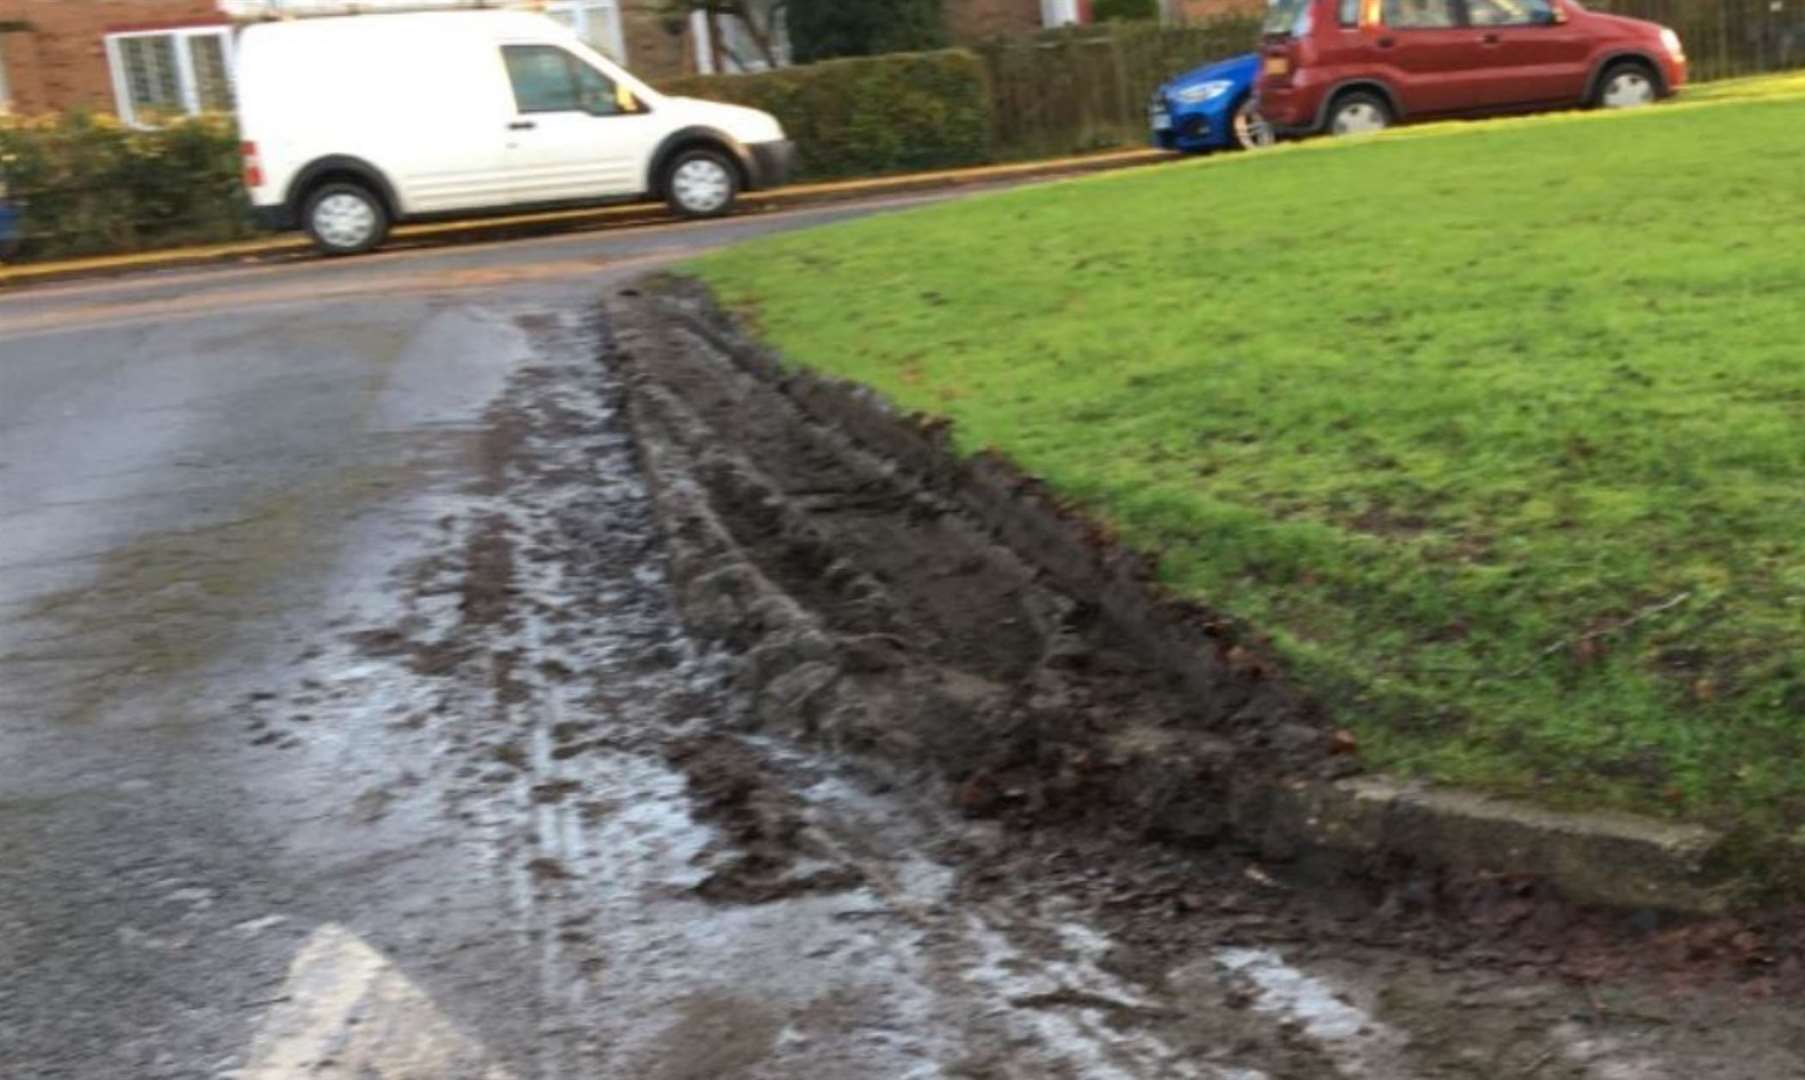 Part of the Mersham village green was churned up when a trucker tried to reverse in January. Picture: Cllr Paul Bartlett